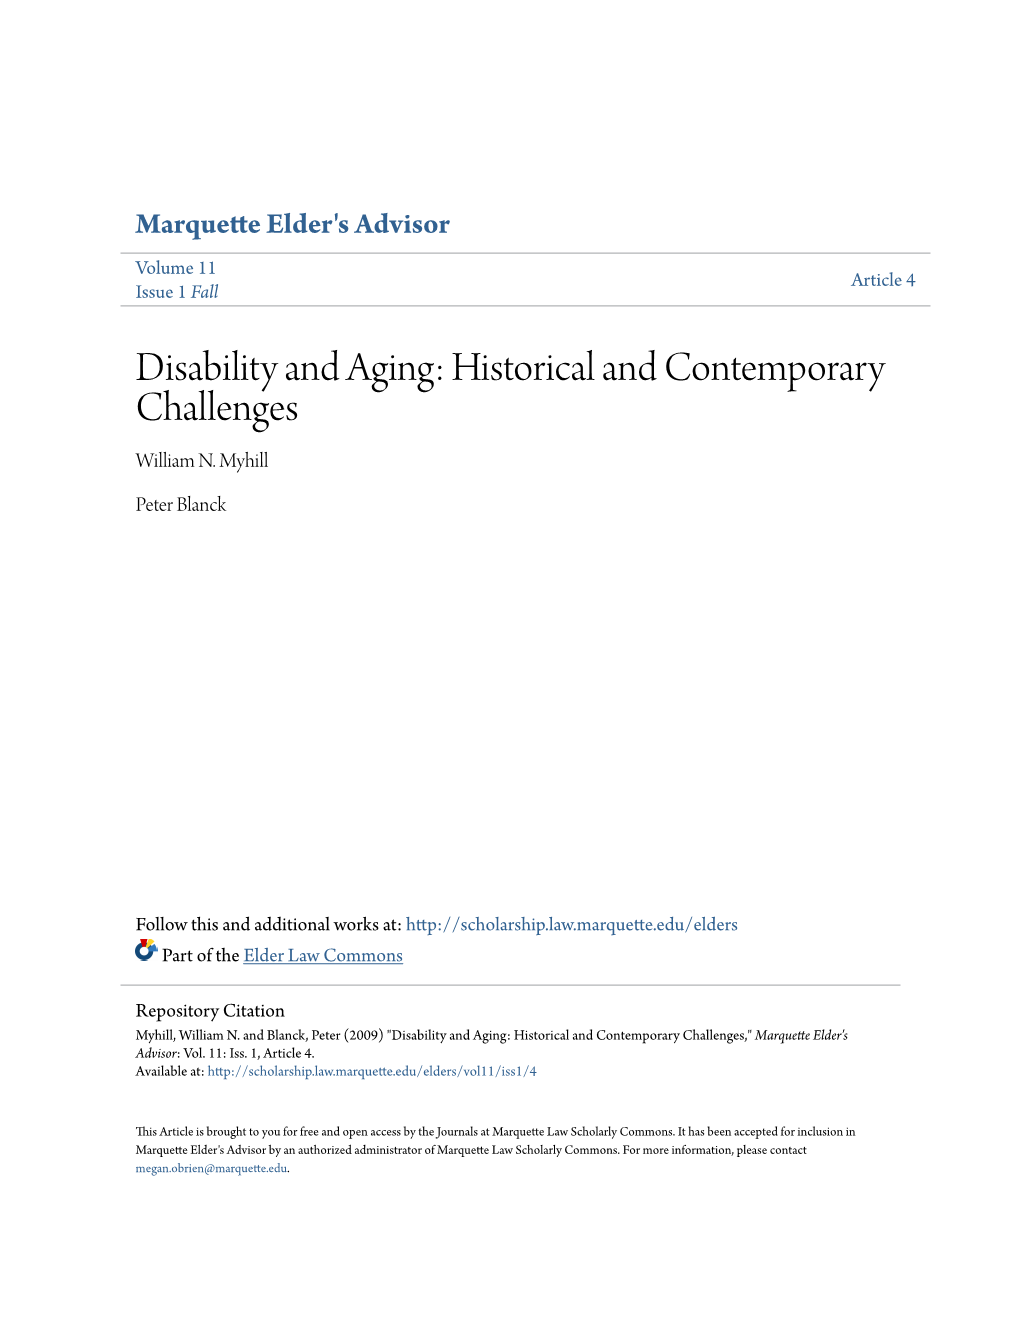 Disability and Aging: Historical and Contemporary Challenges William N